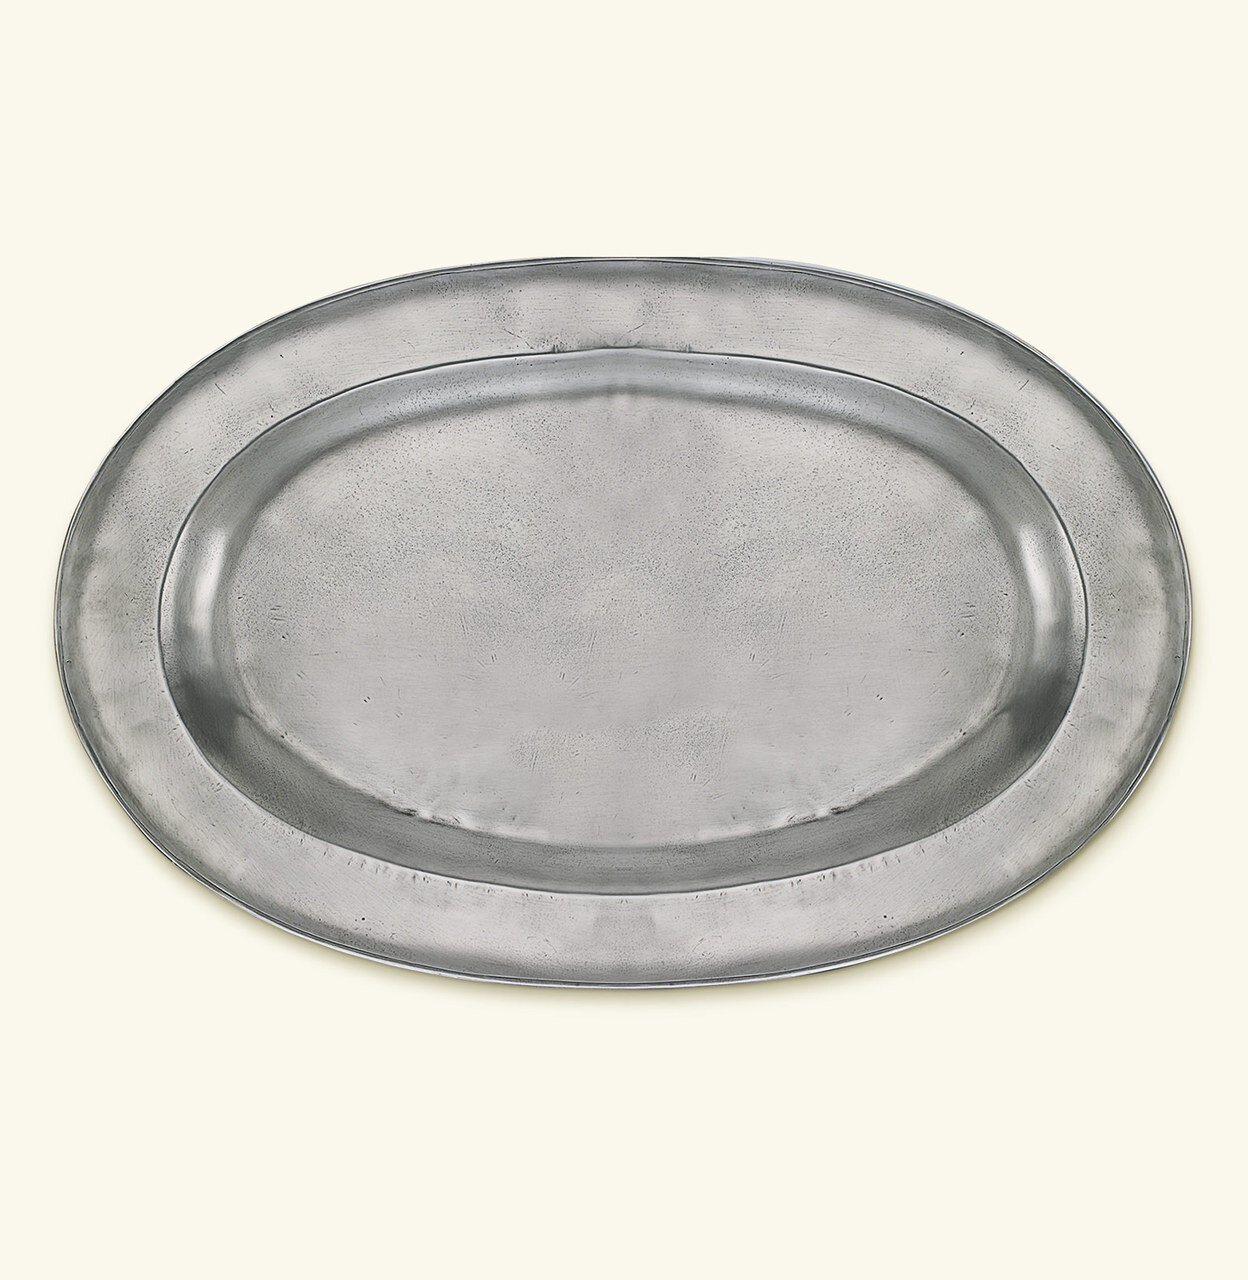 Match Pewter Wide Rimmed Oval Platter a442.5